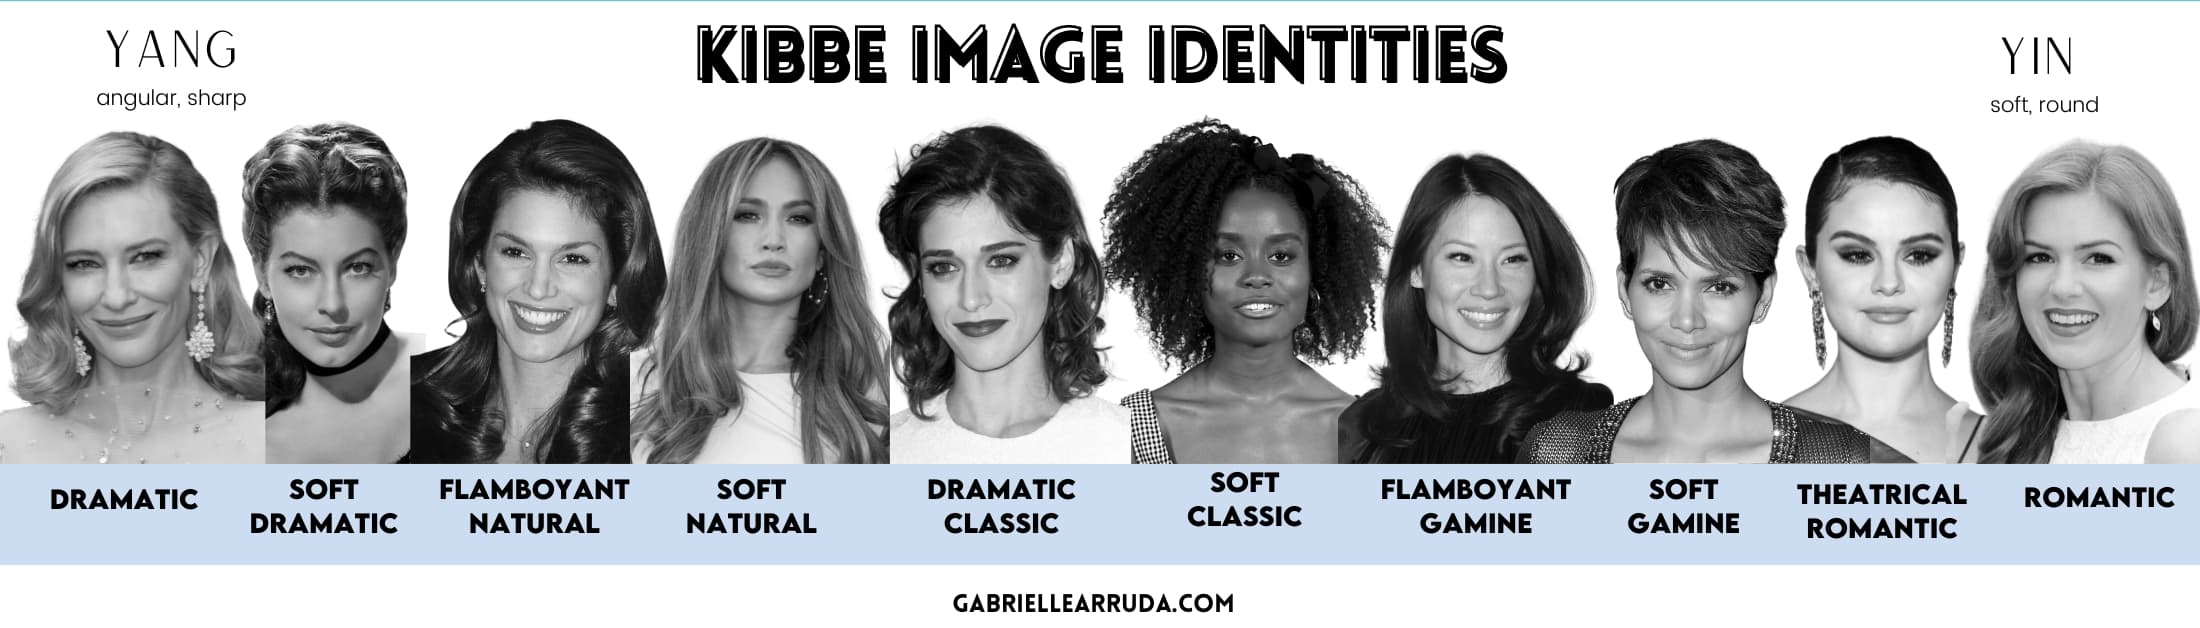 kibbe faces of each image identities verified celebrities